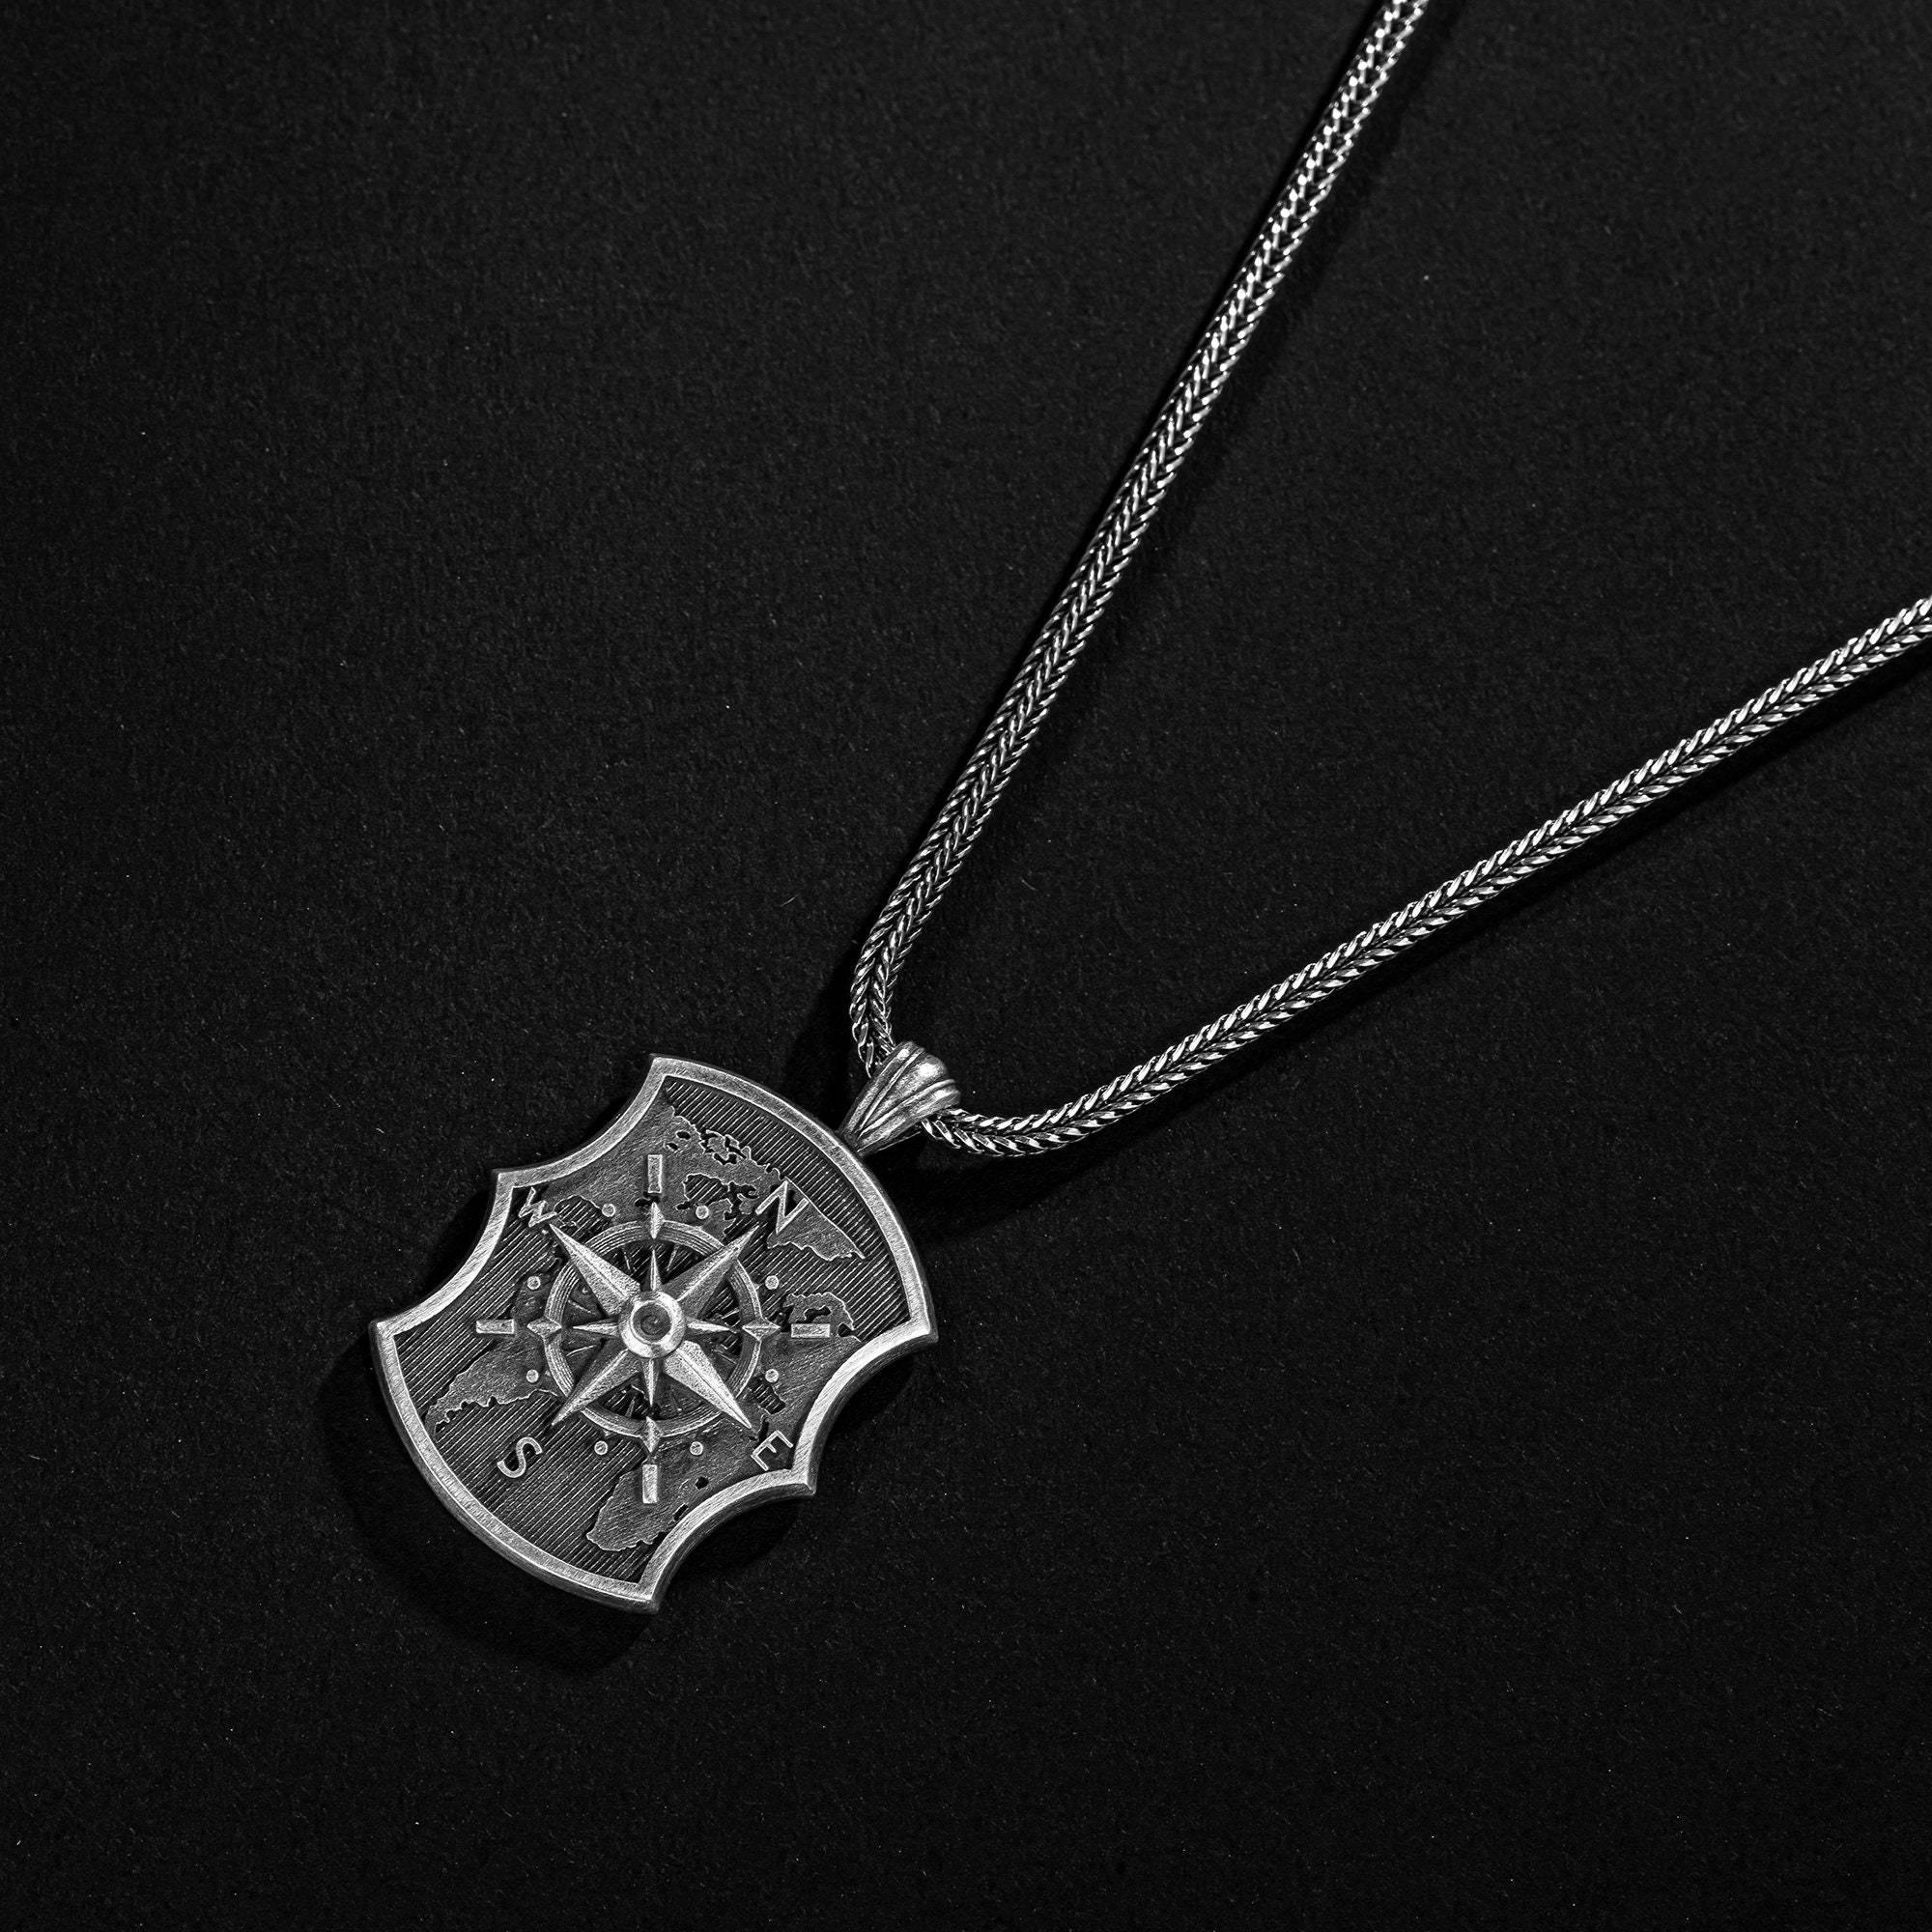 Silver Compass Necklace, Oxidized Compass Necklace, Unisex Jewelry - OXO SILVER